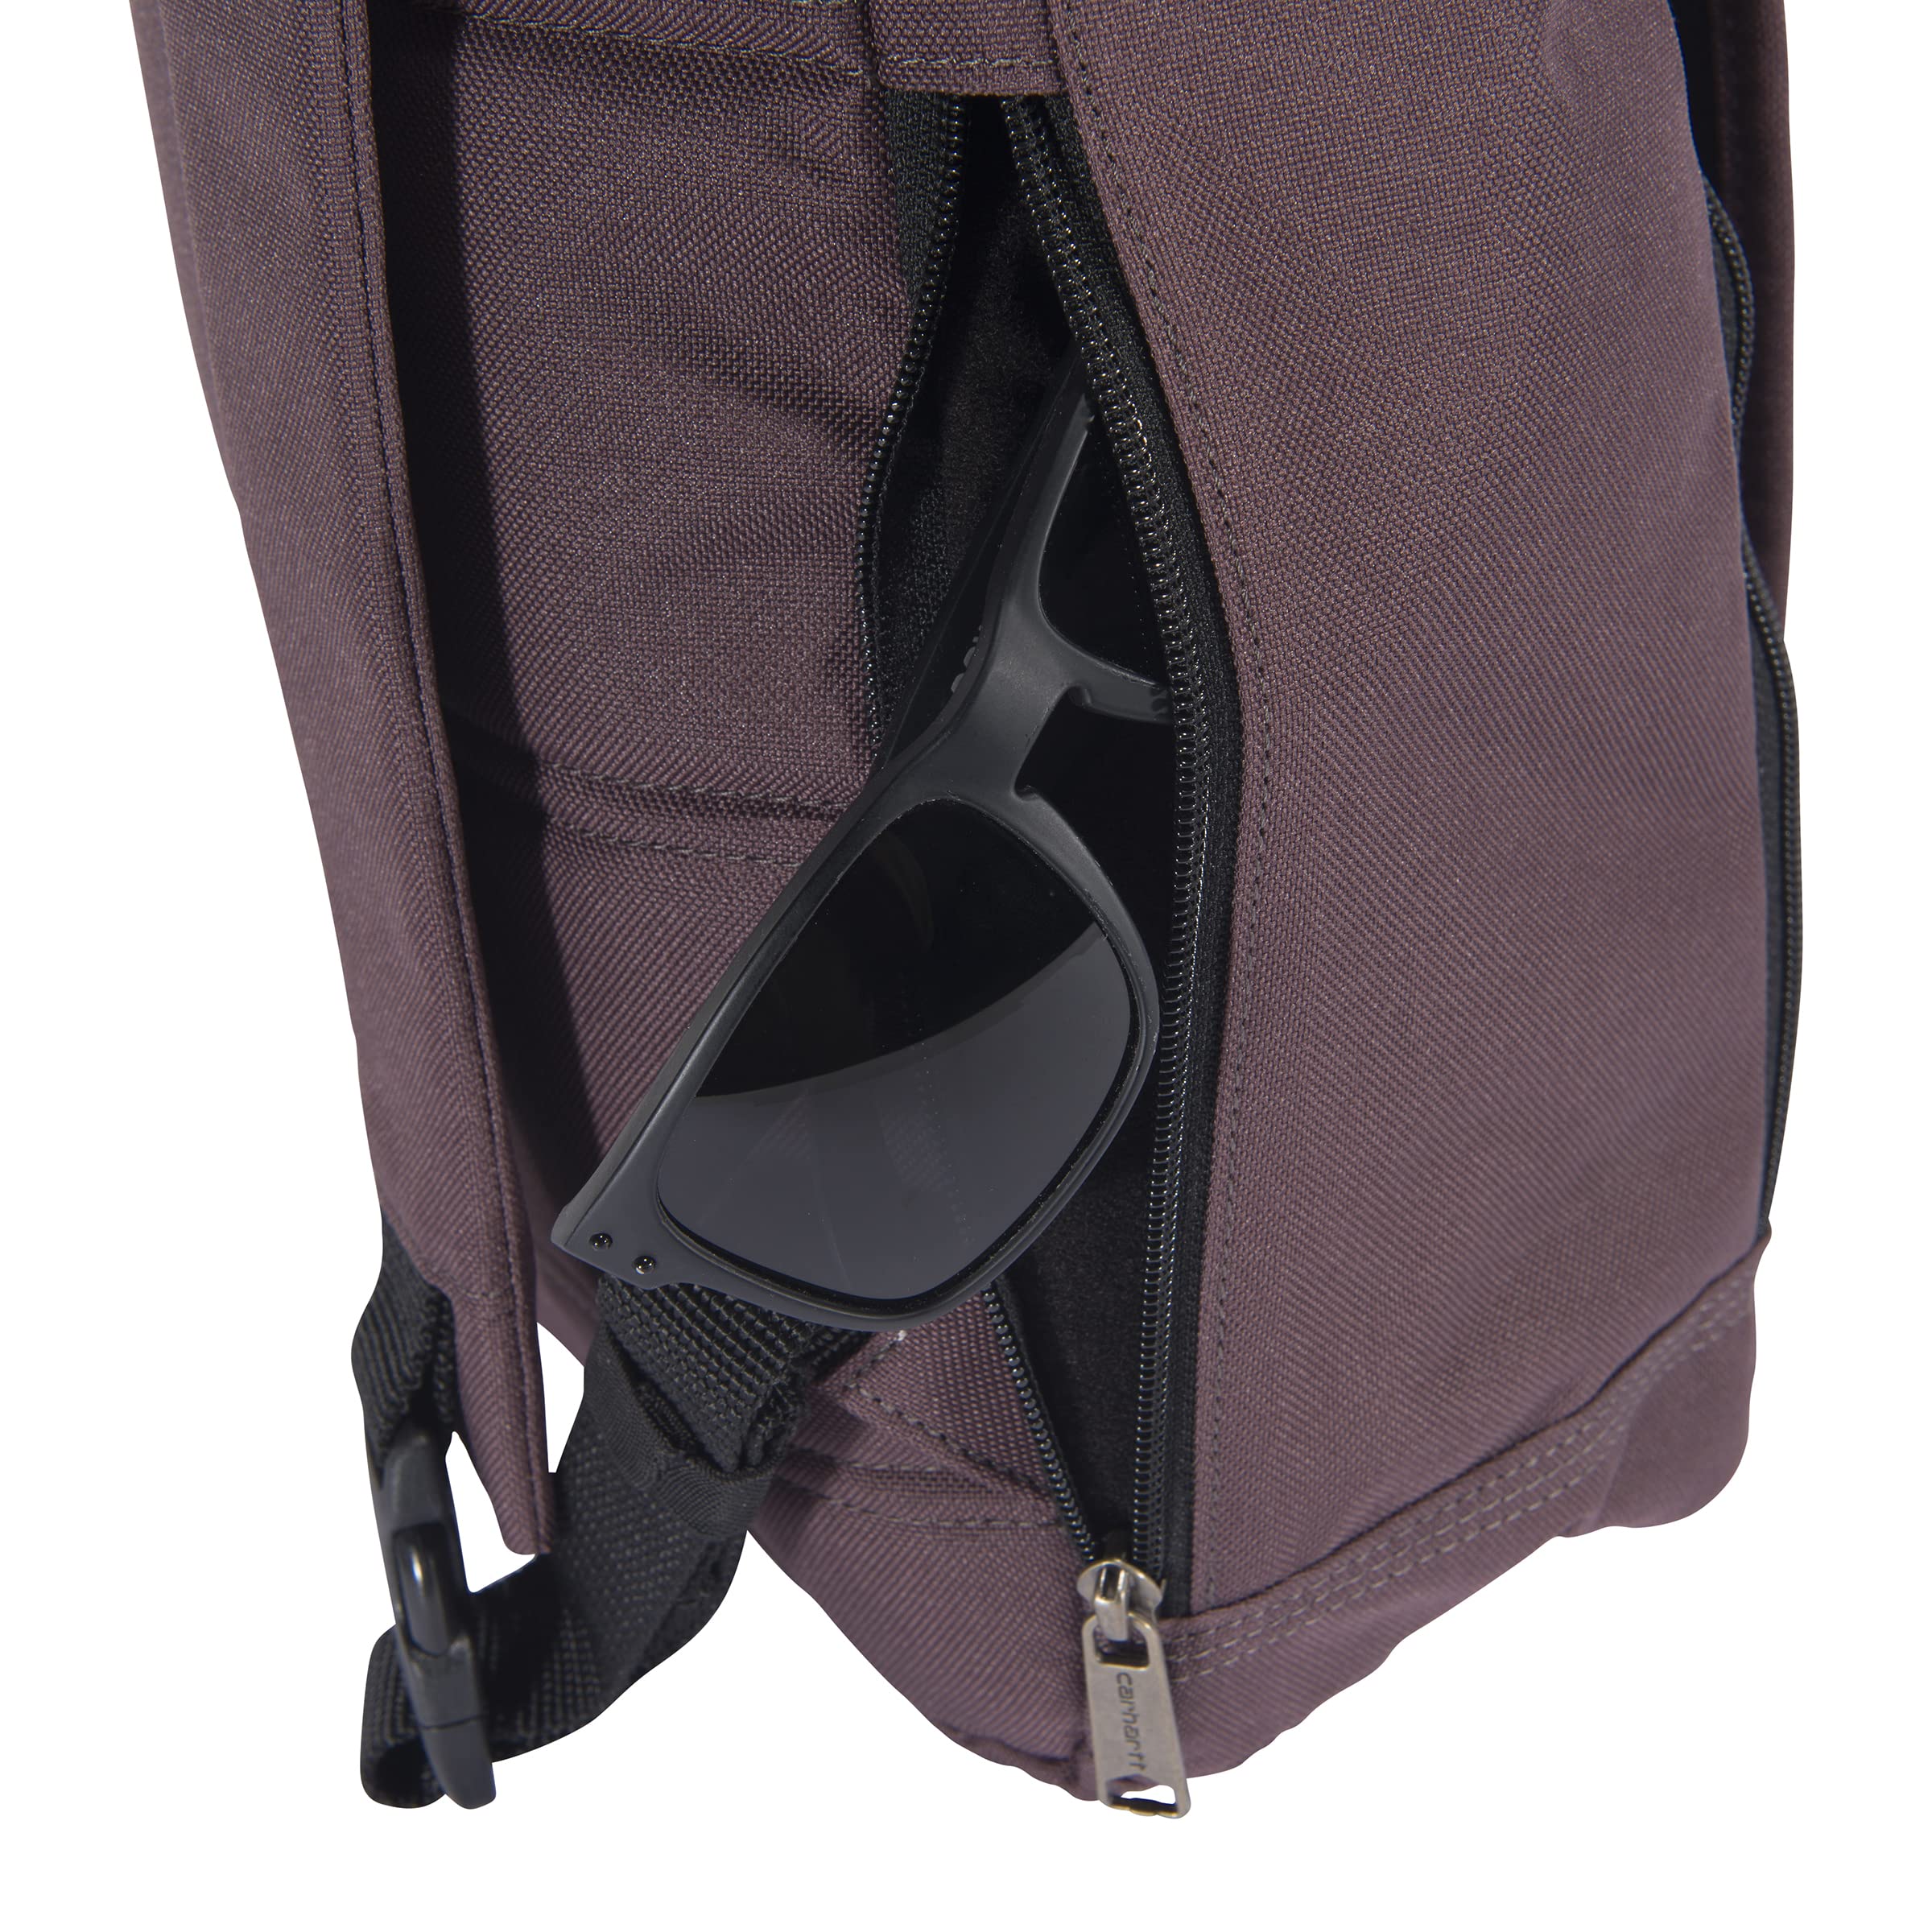 Carhartt Bag, Sling Crossbody Backpack with Side Release Buckle & Tablet Sleeve, Wine, One Size